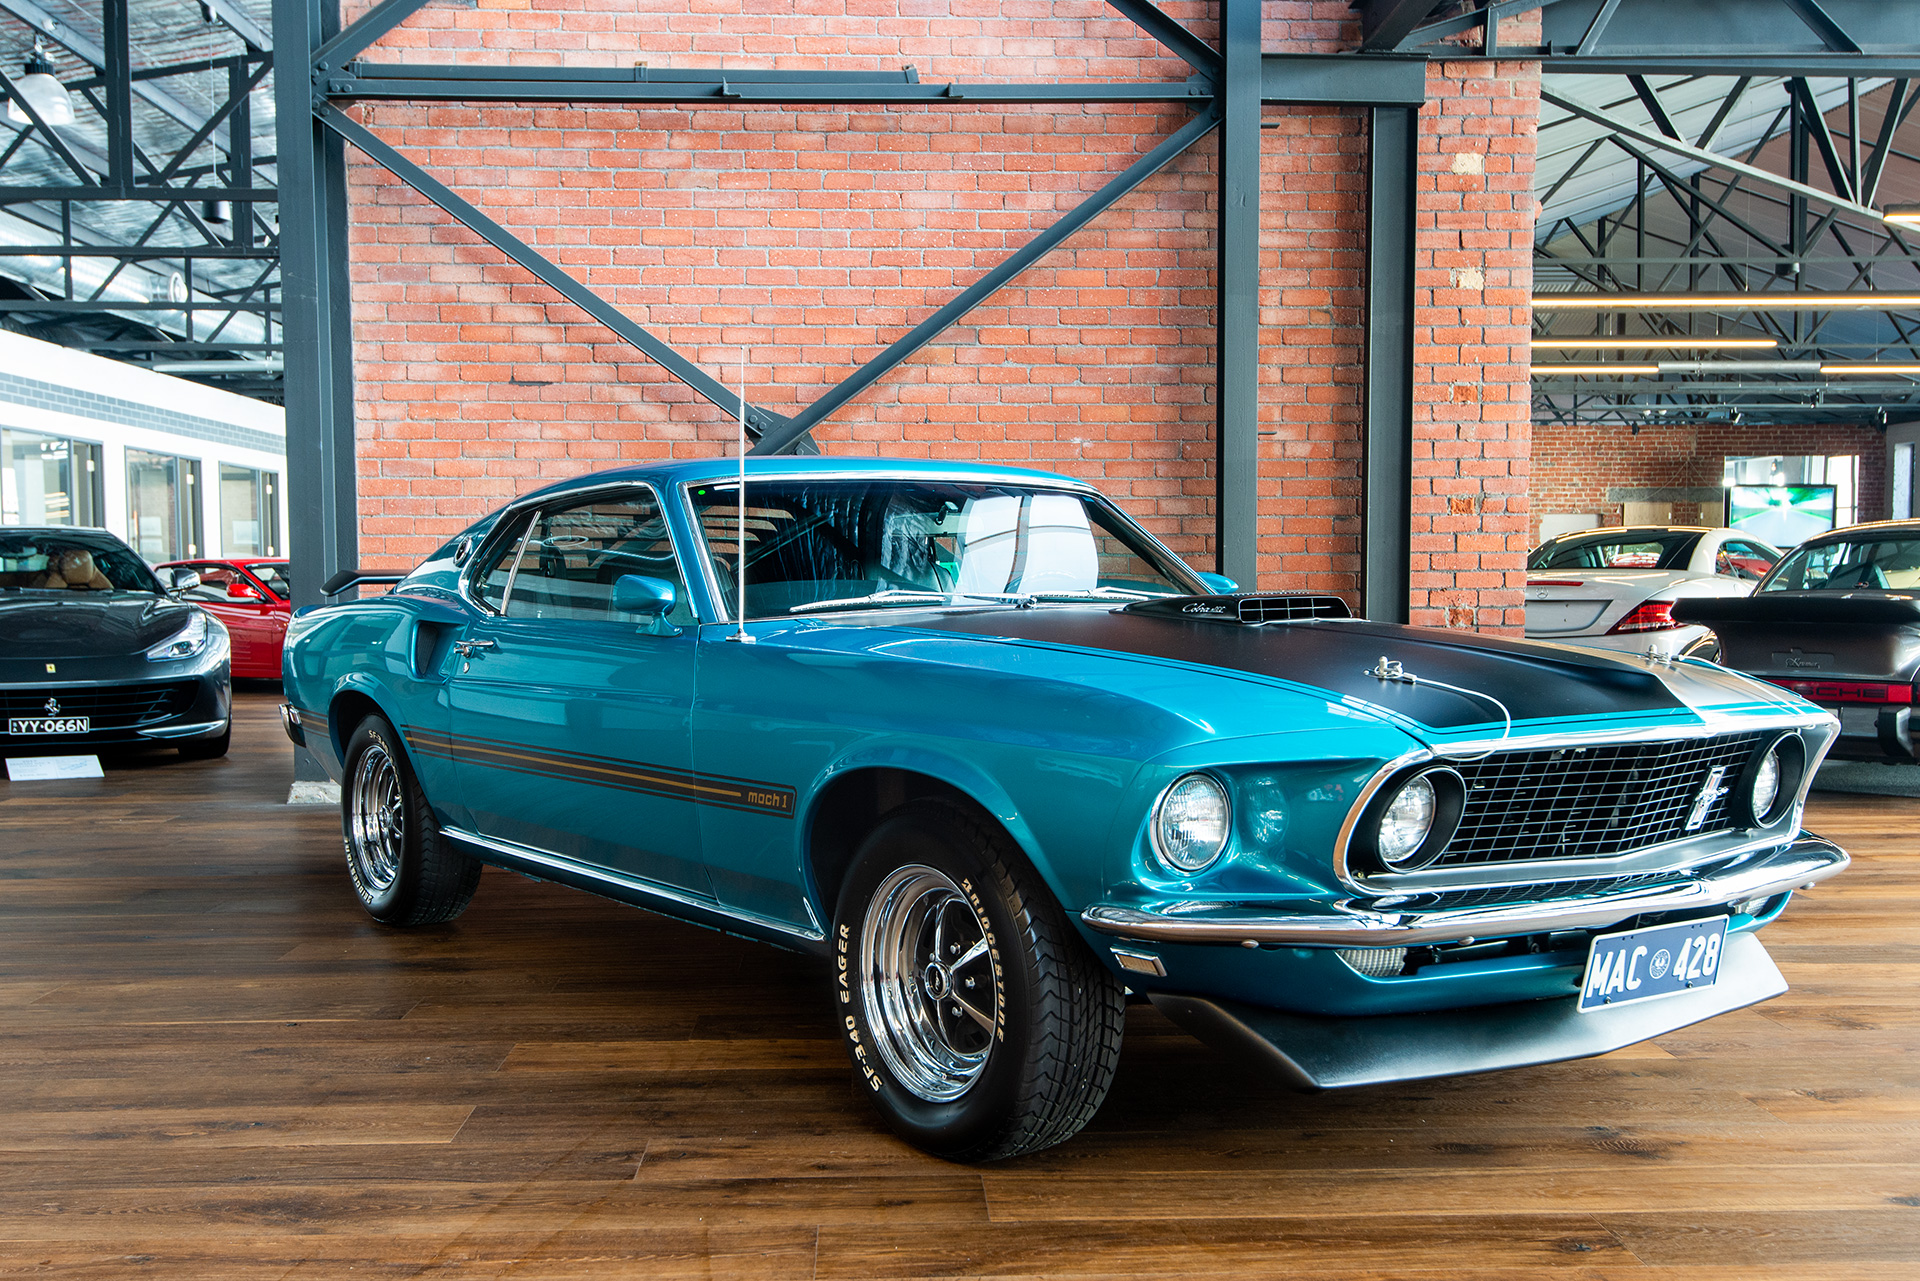 1969 Ford Mustang Mach 1 428 Cobra Jet - Richmonds - Classic and Prestige Cars - Storage and